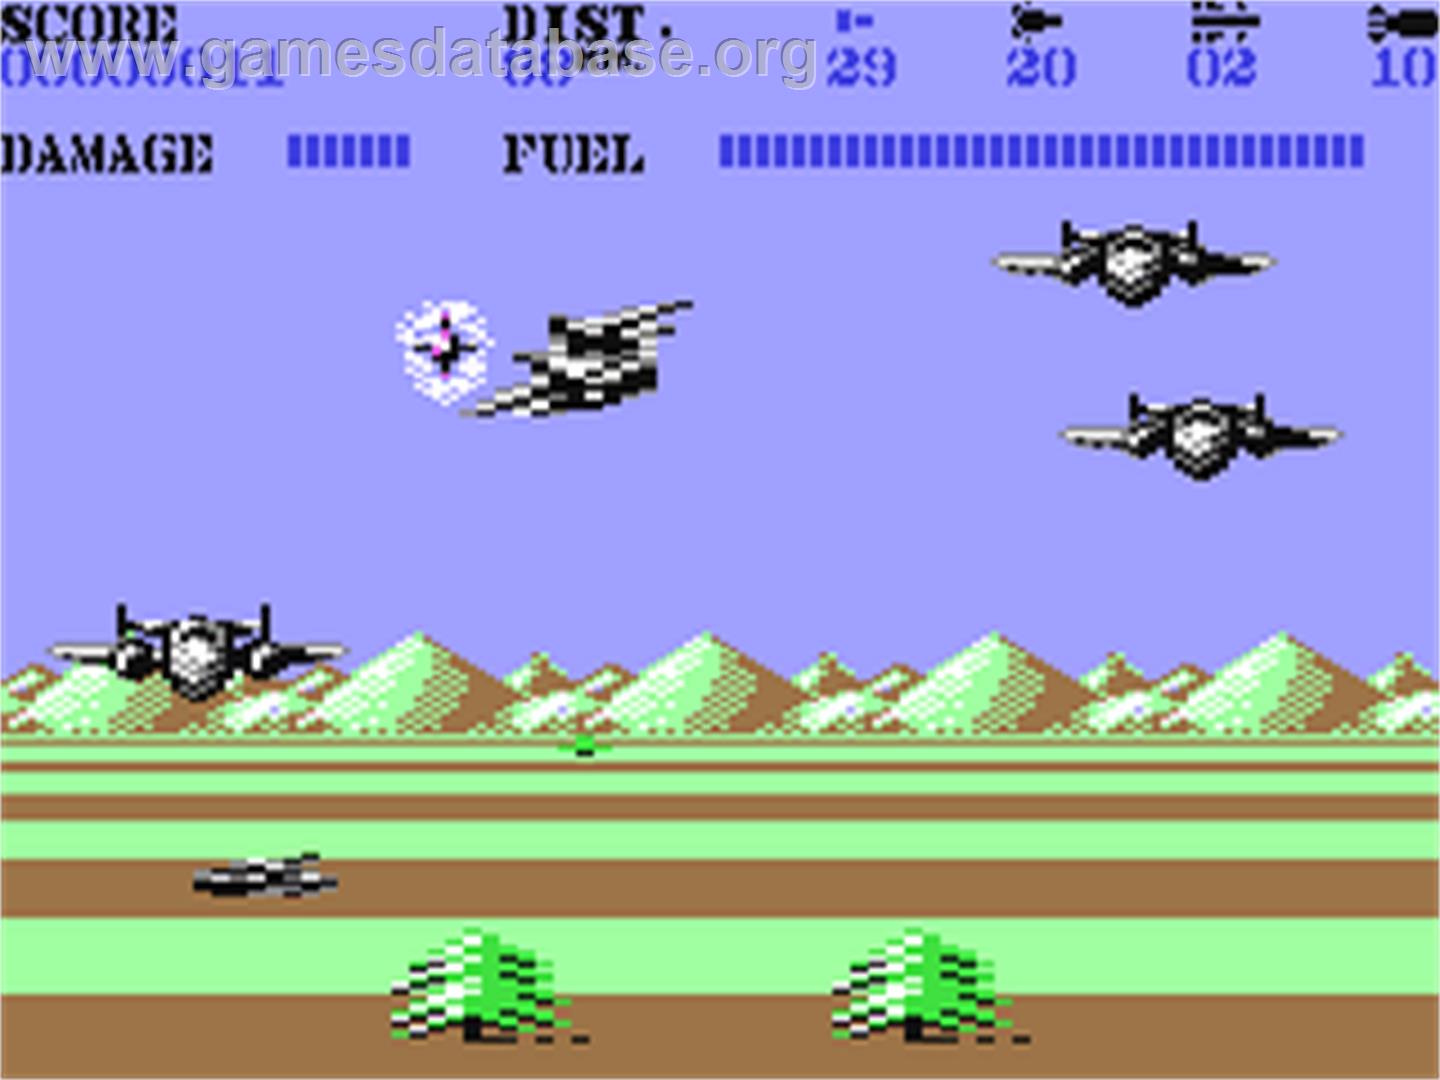 Mig-29 Soviet Fighter - Commodore 64 - Artwork - In Game